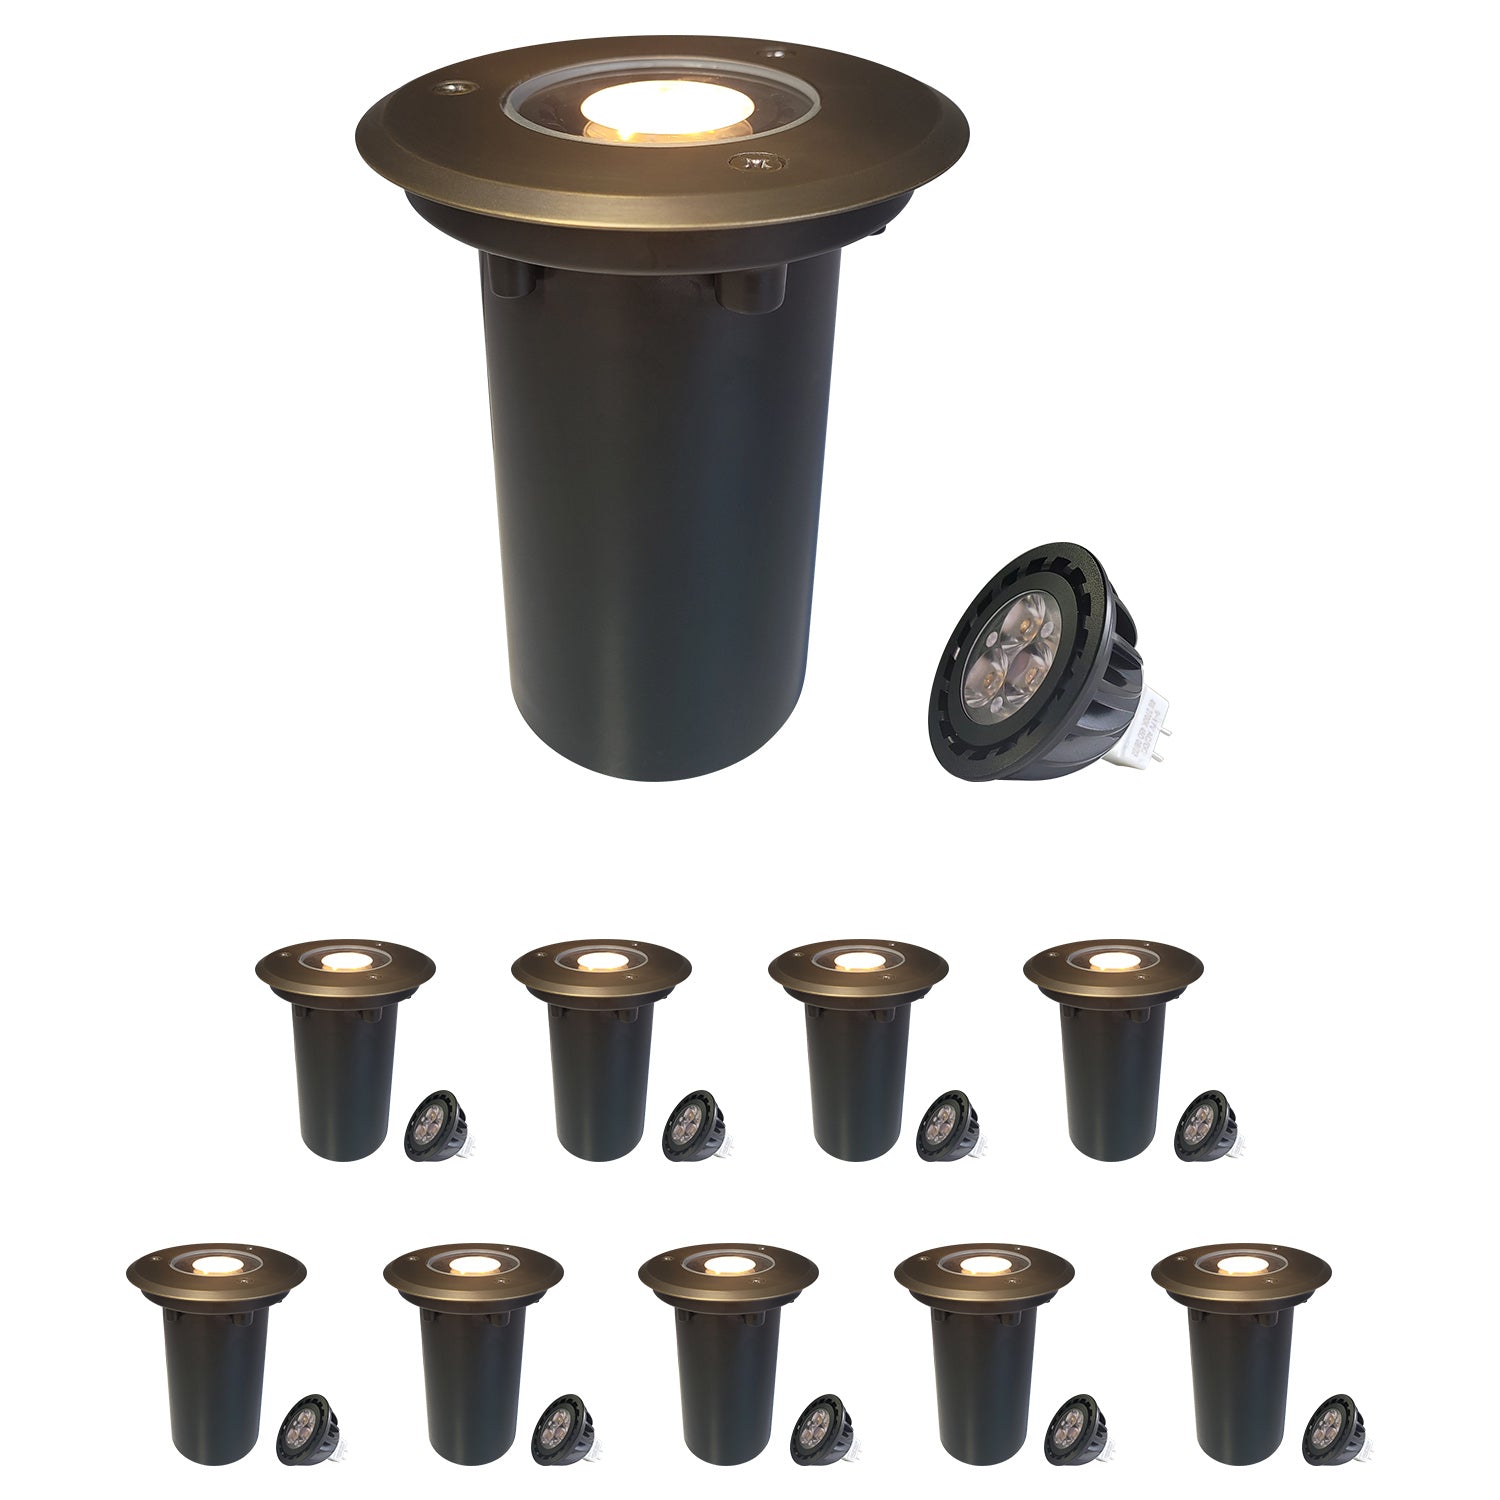 LED outdoor in-ground well lights for landscape tree lighting COG303B set with low voltage pathway illumination.